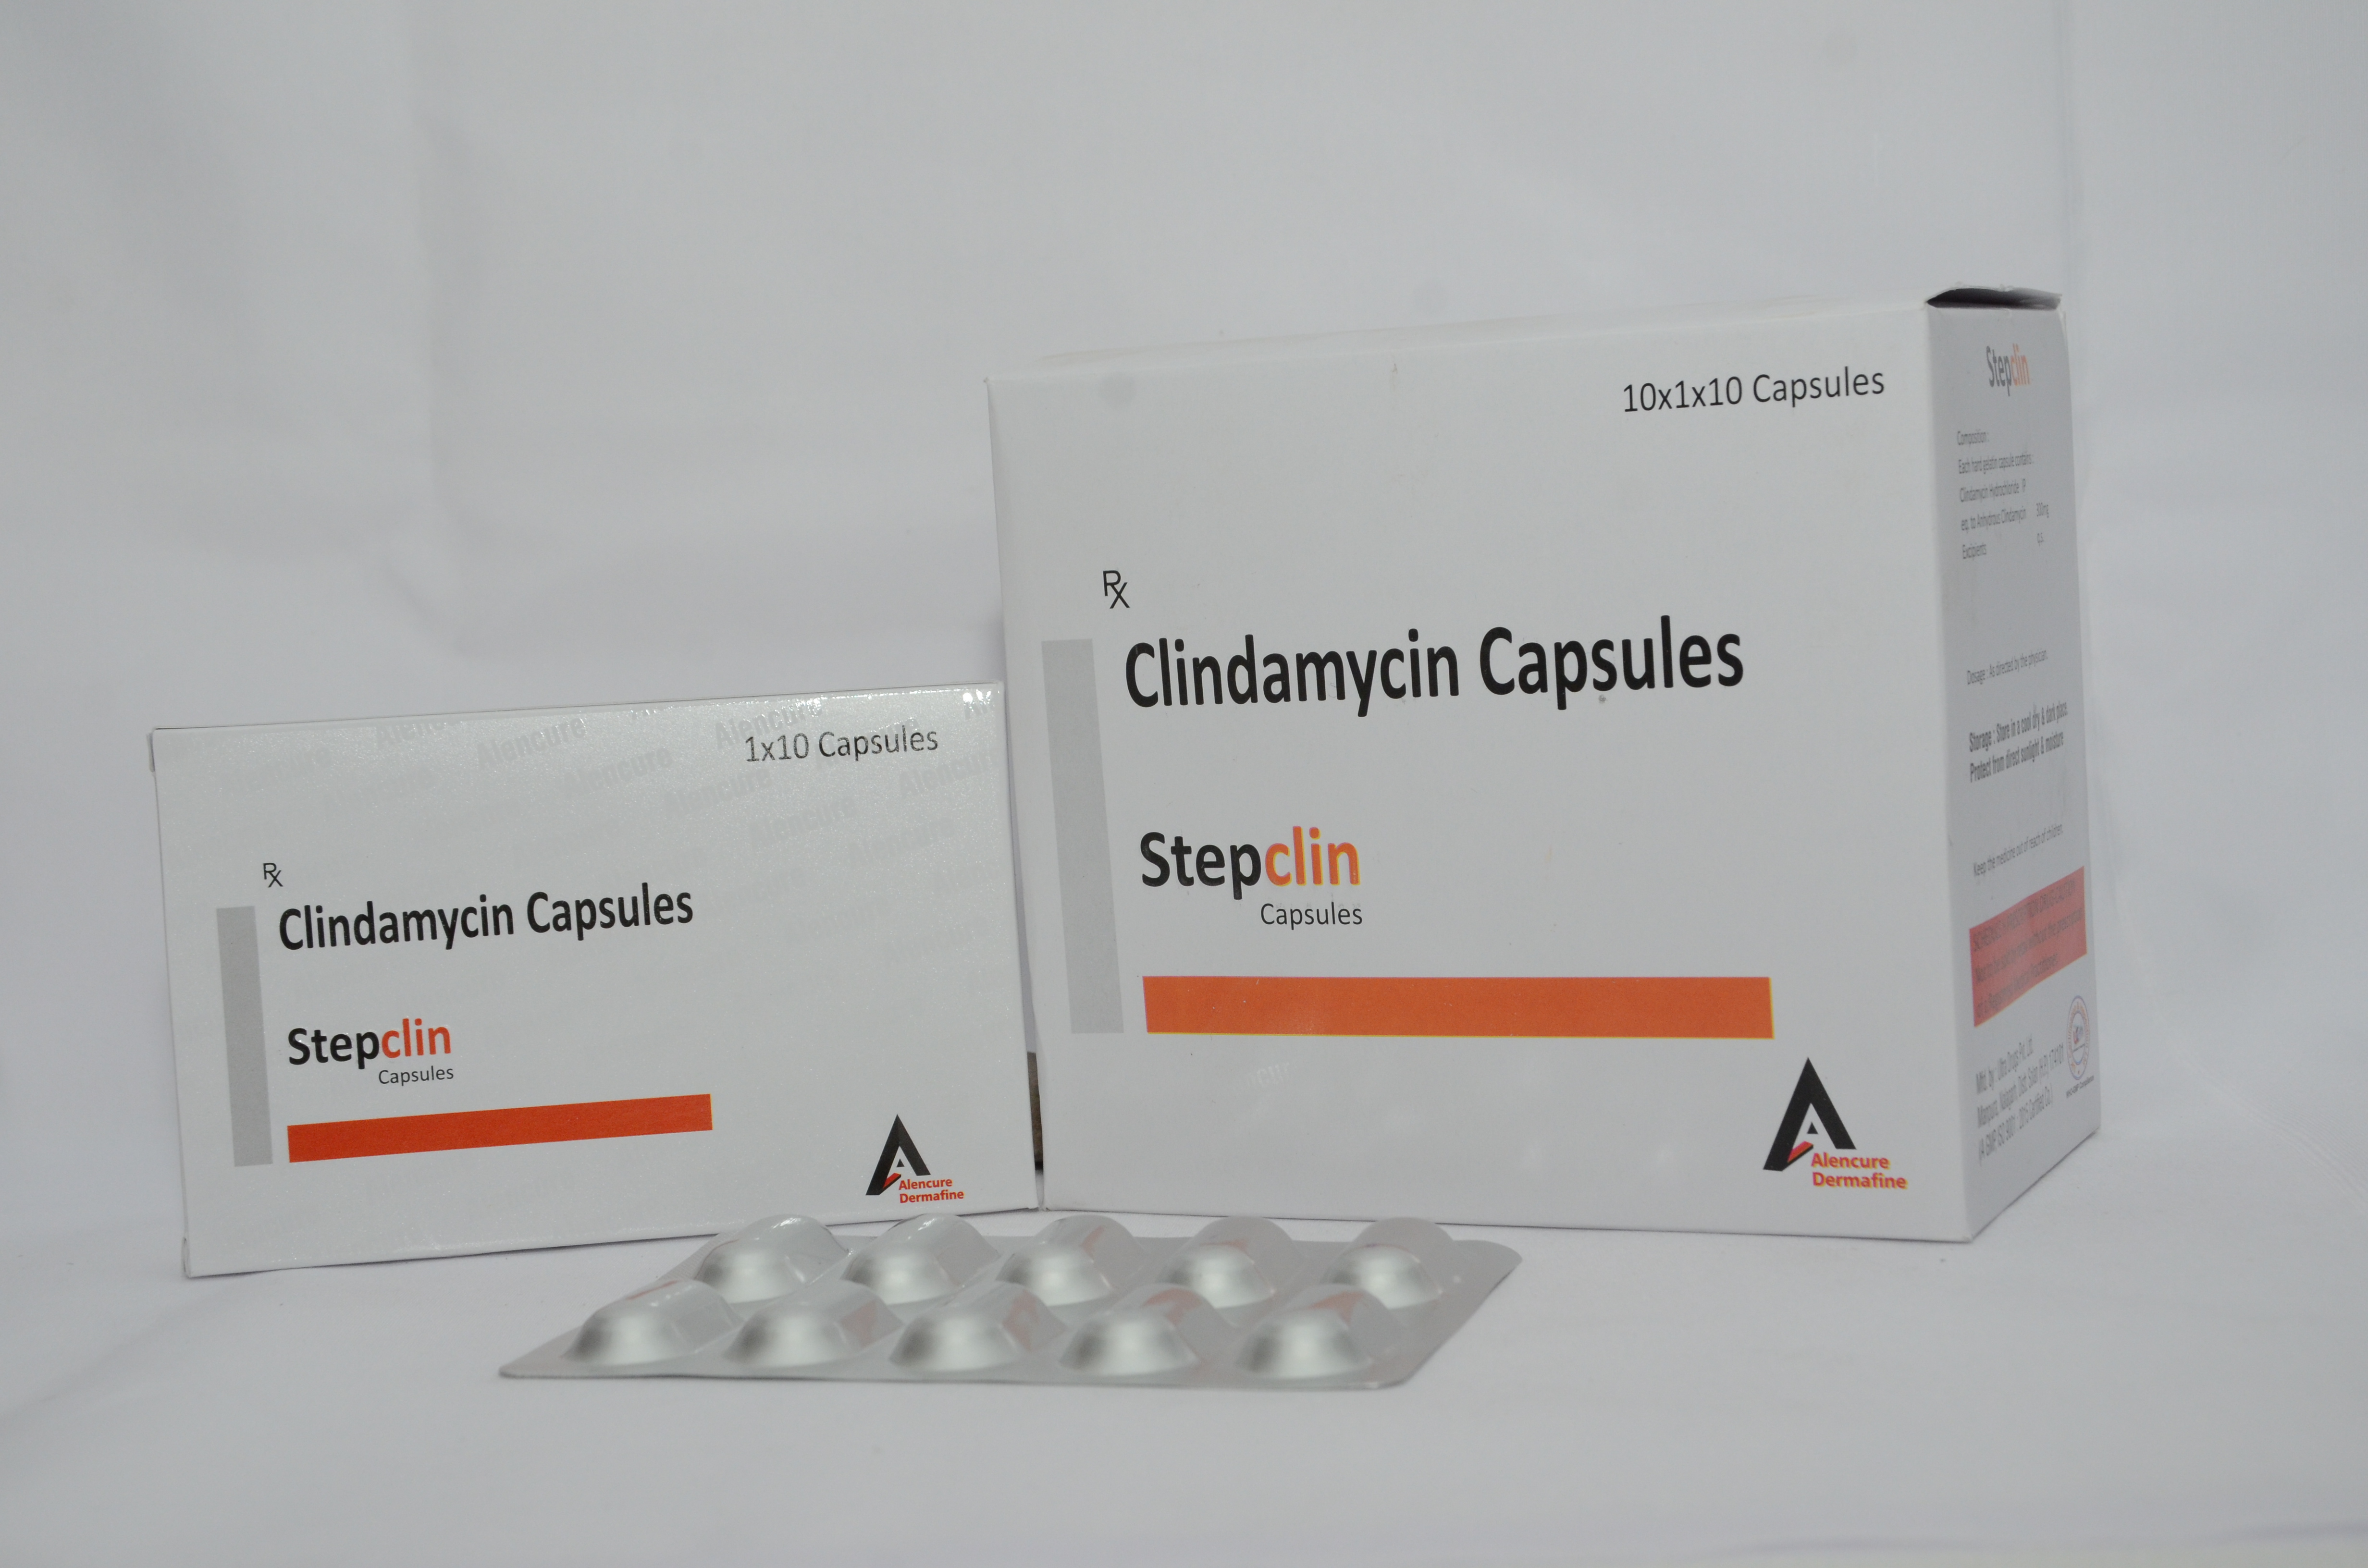 Product Name: STEPCLIN, Compositions of STEPCLIN are Clindamycin Capsules - Alencure Biotech Pvt Ltd